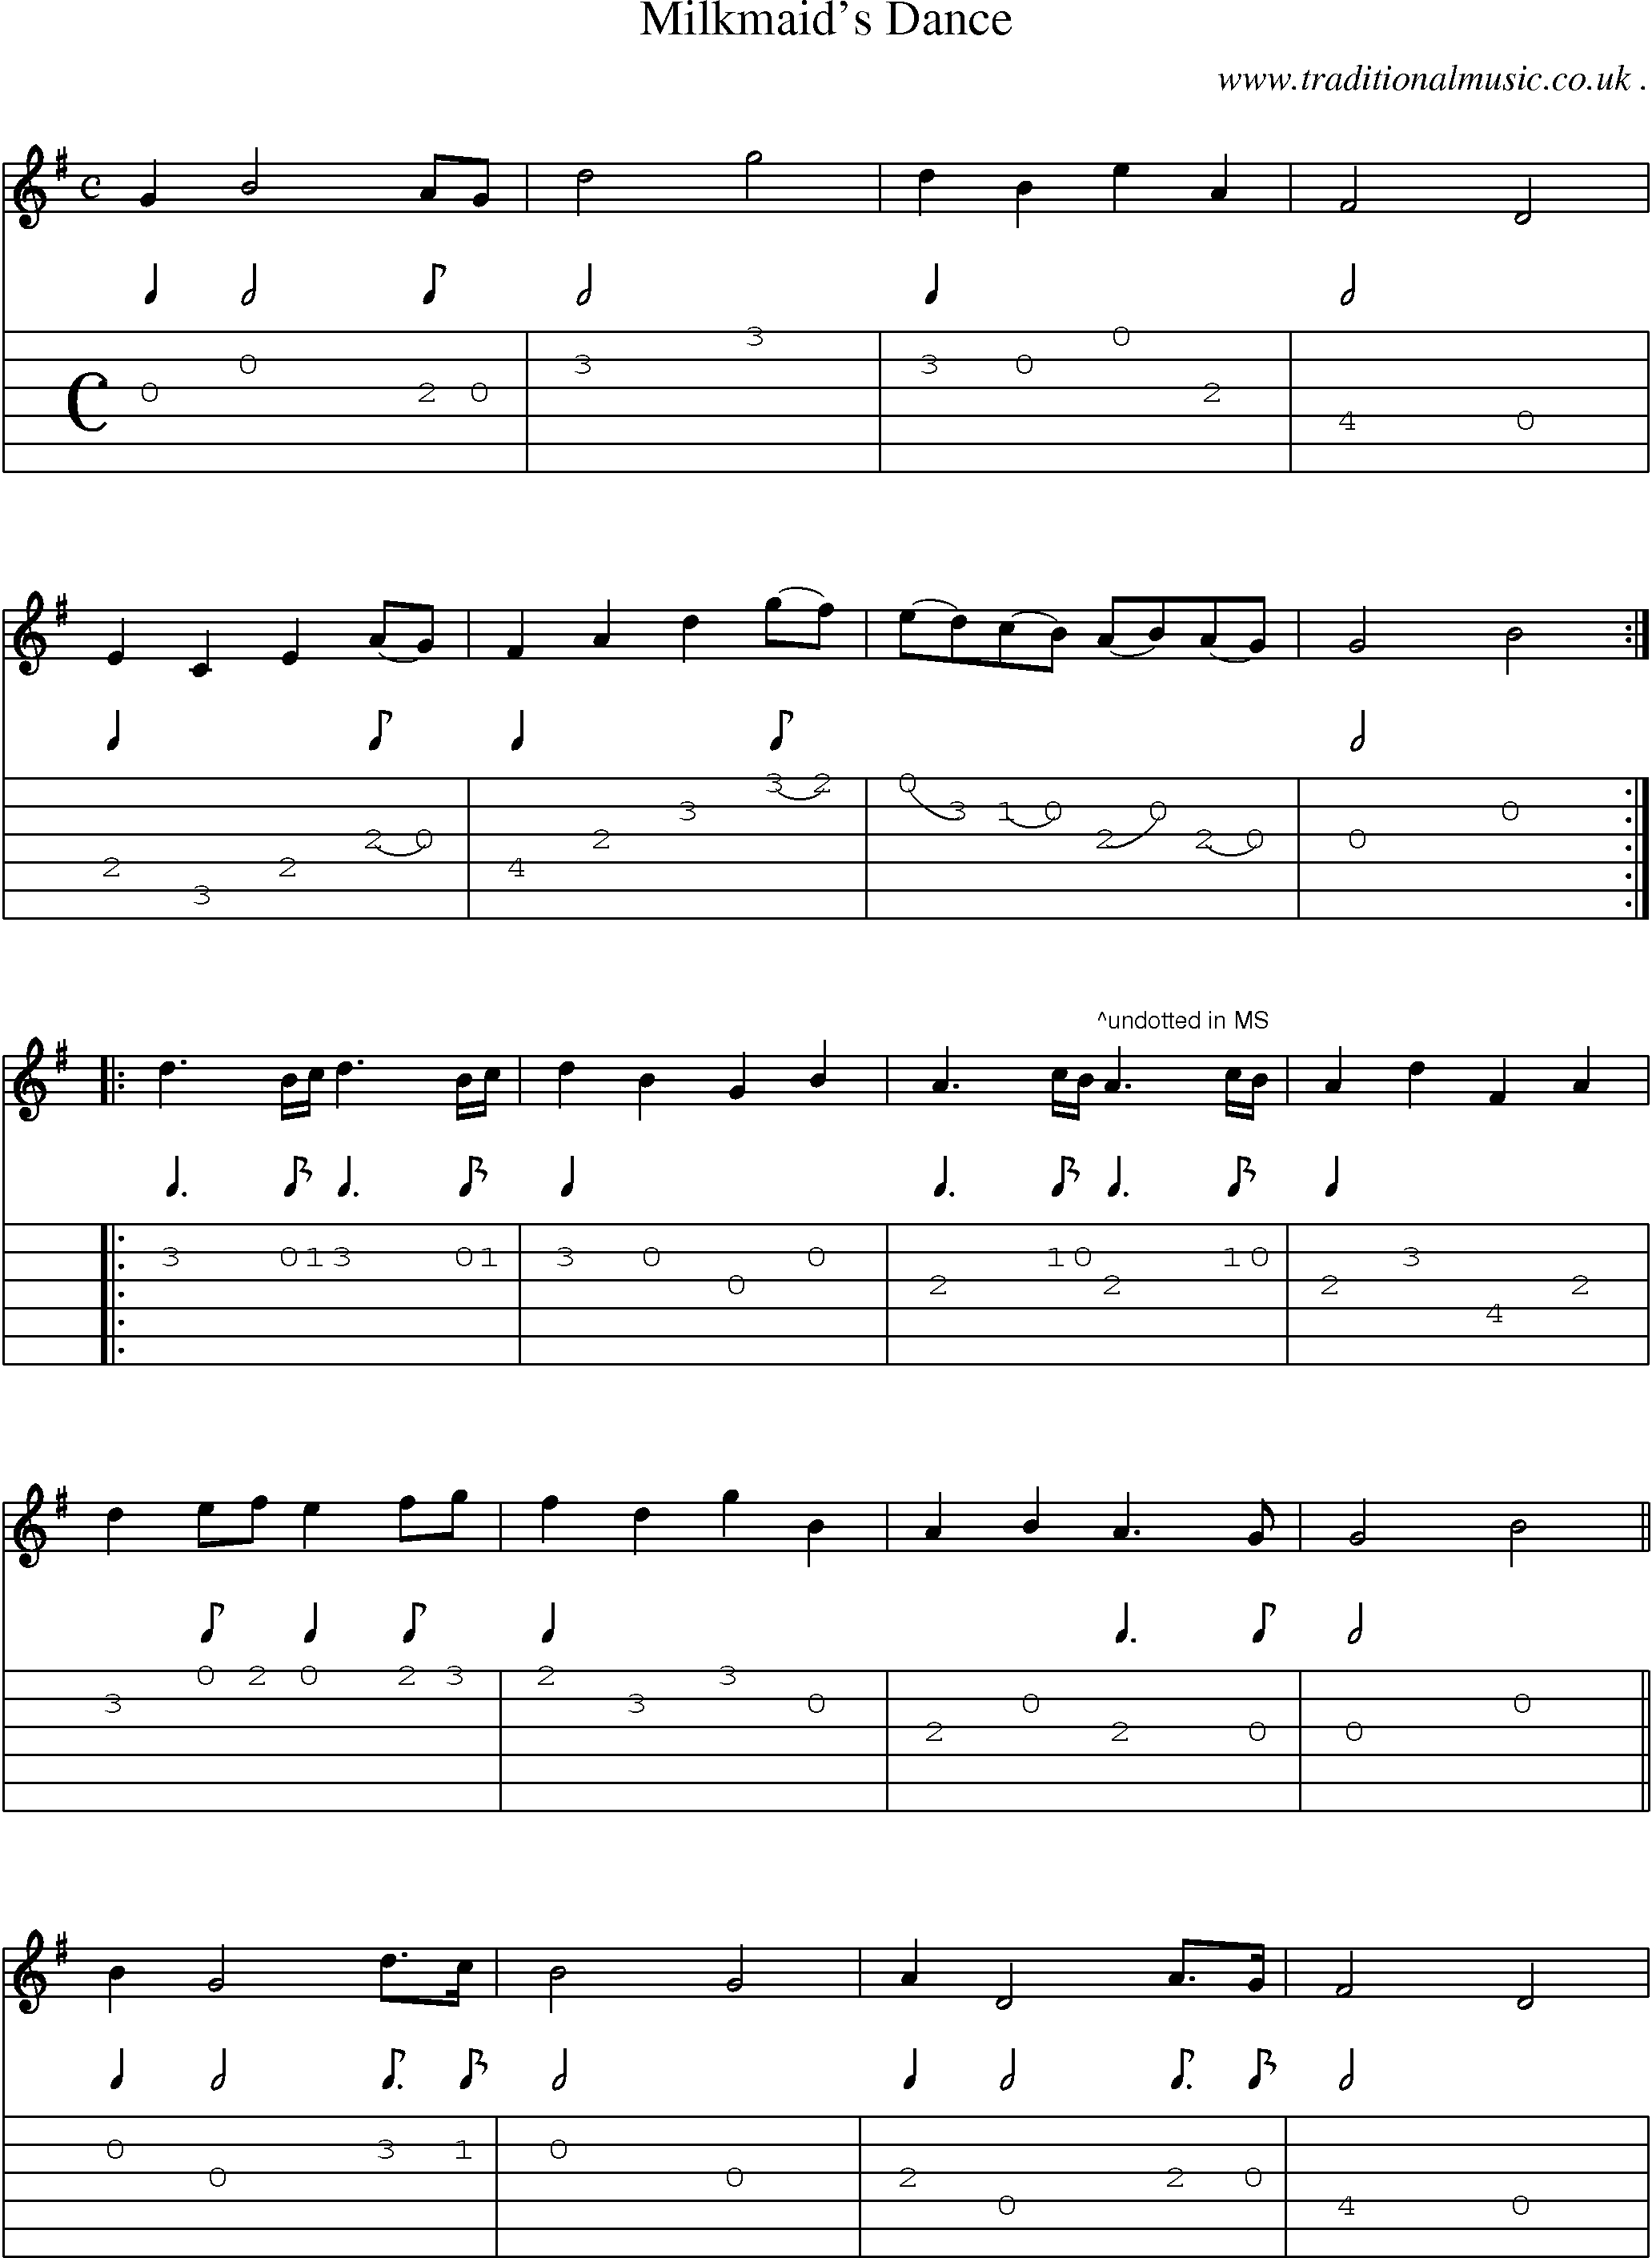 Sheet-Music and Guitar Tabs for Milkmaids Dance